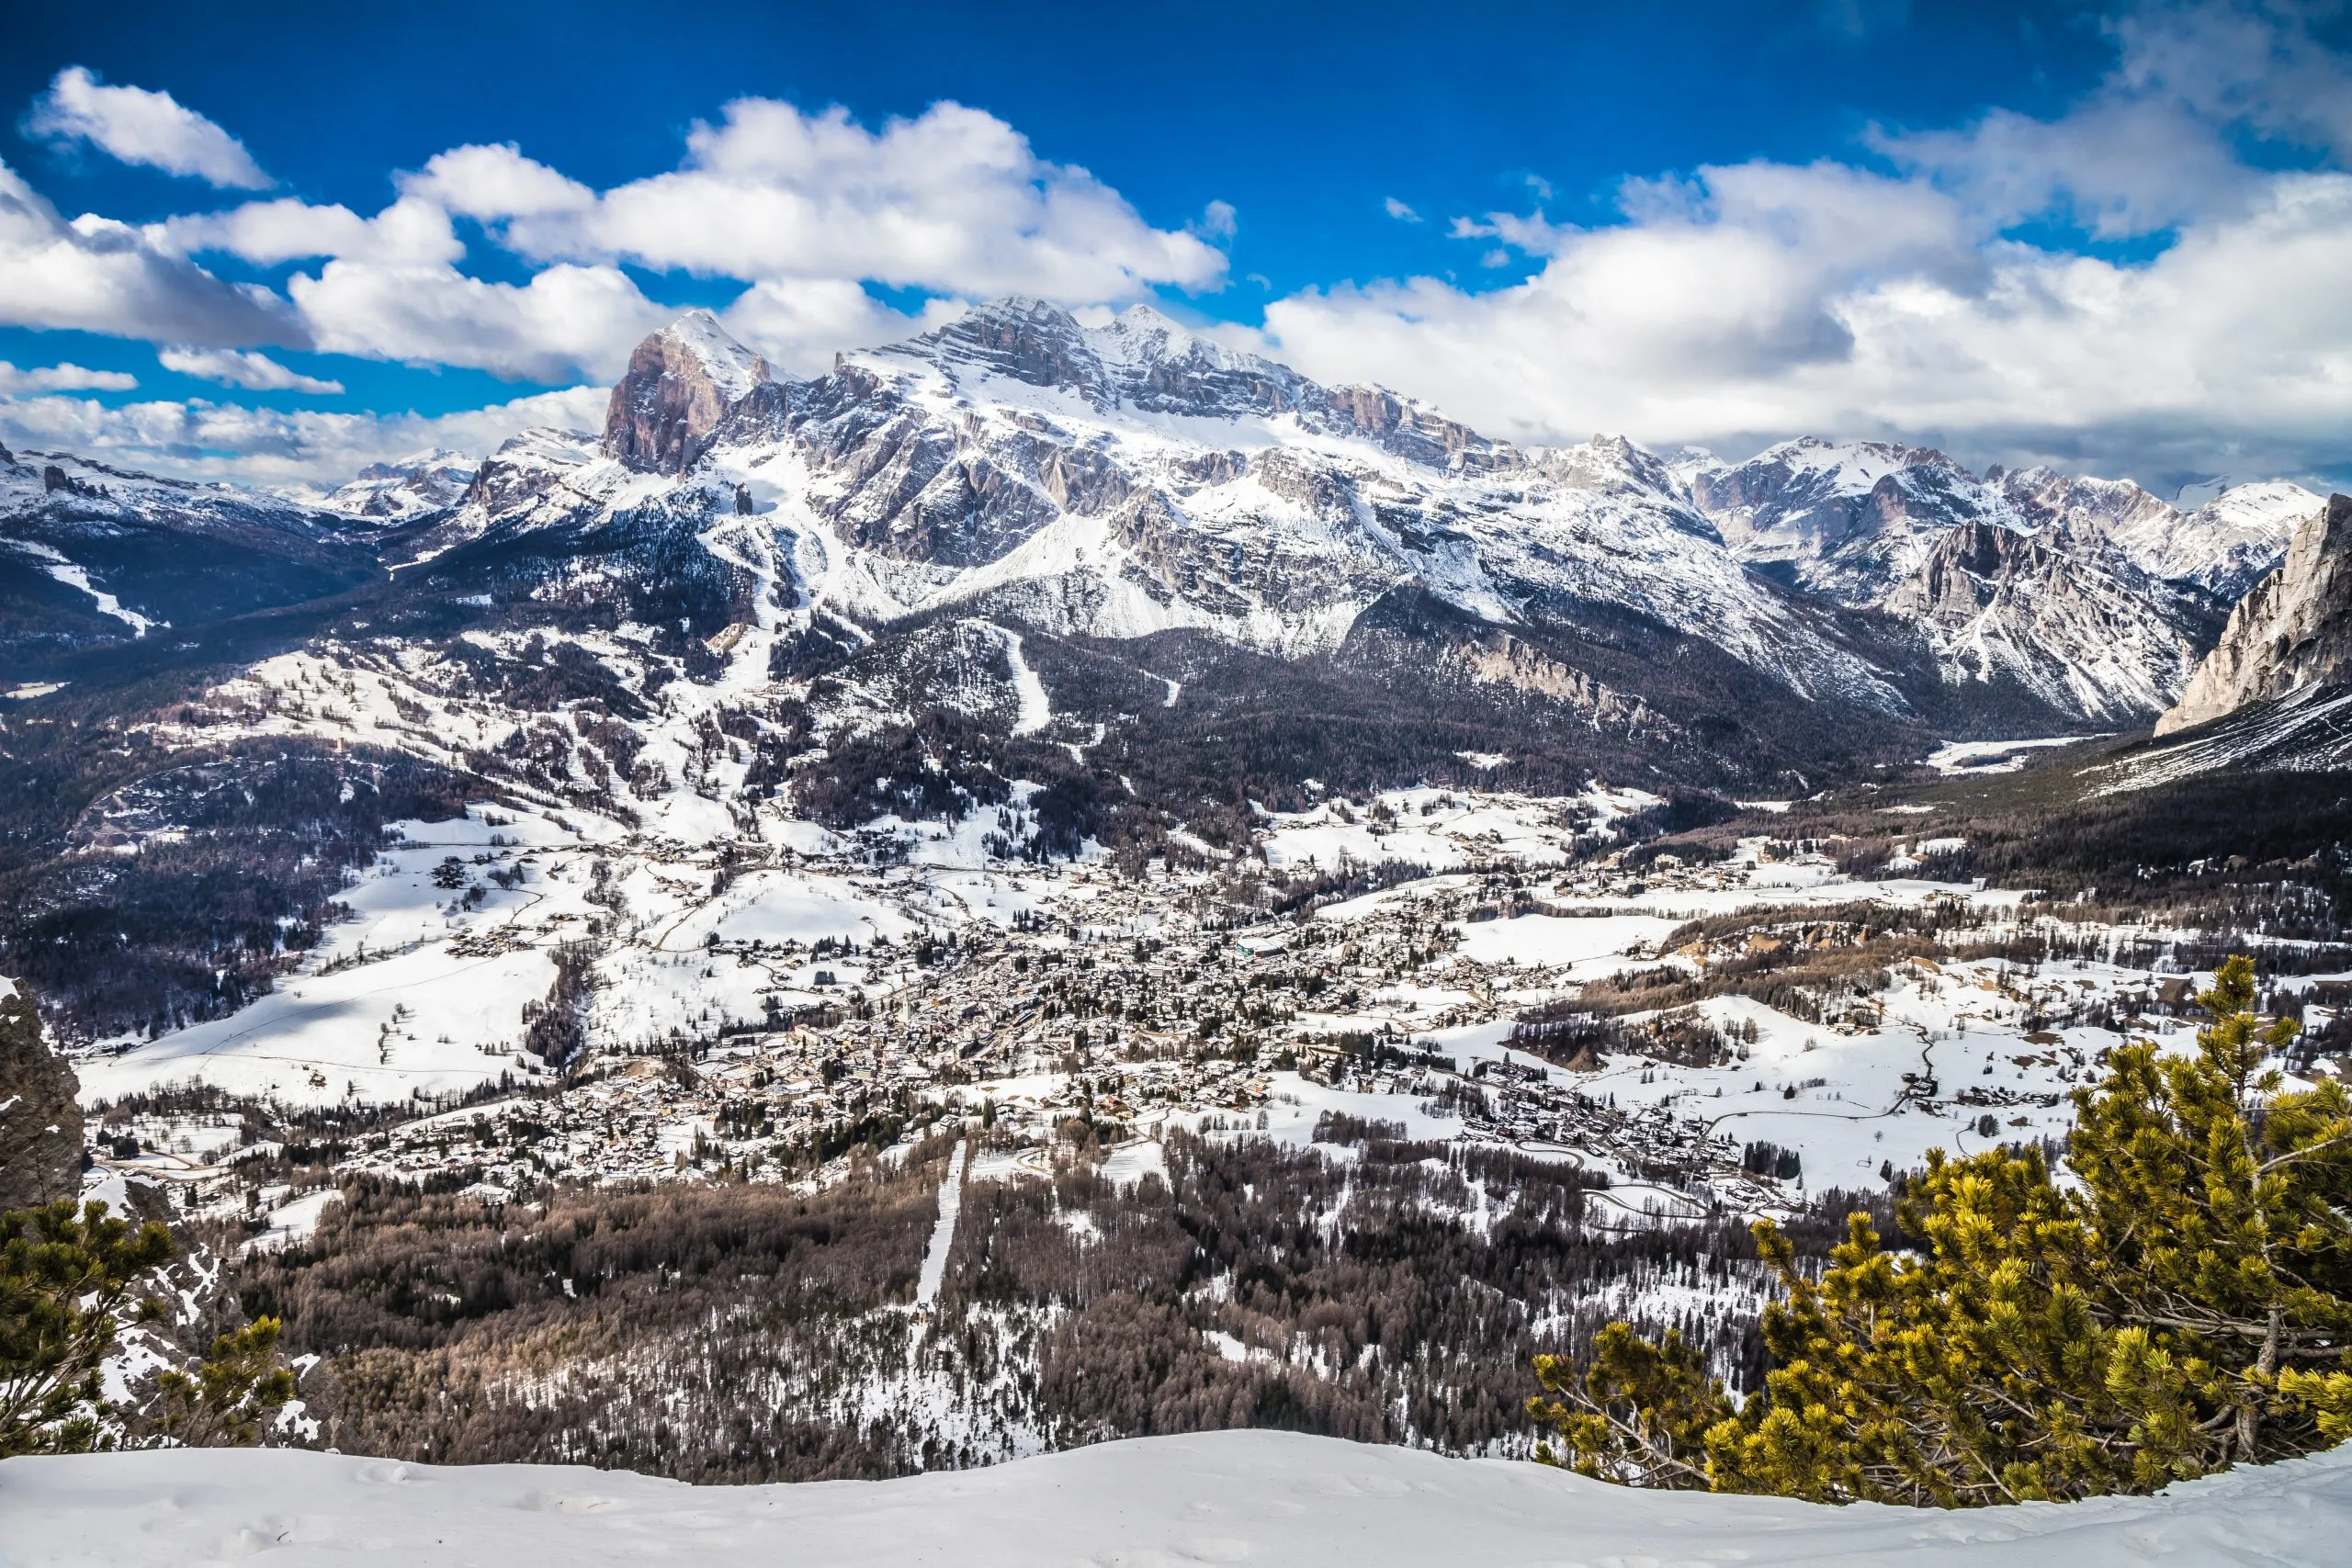 Scenic view from one of the peaks near Cortina d'Ampezzo, Italy.